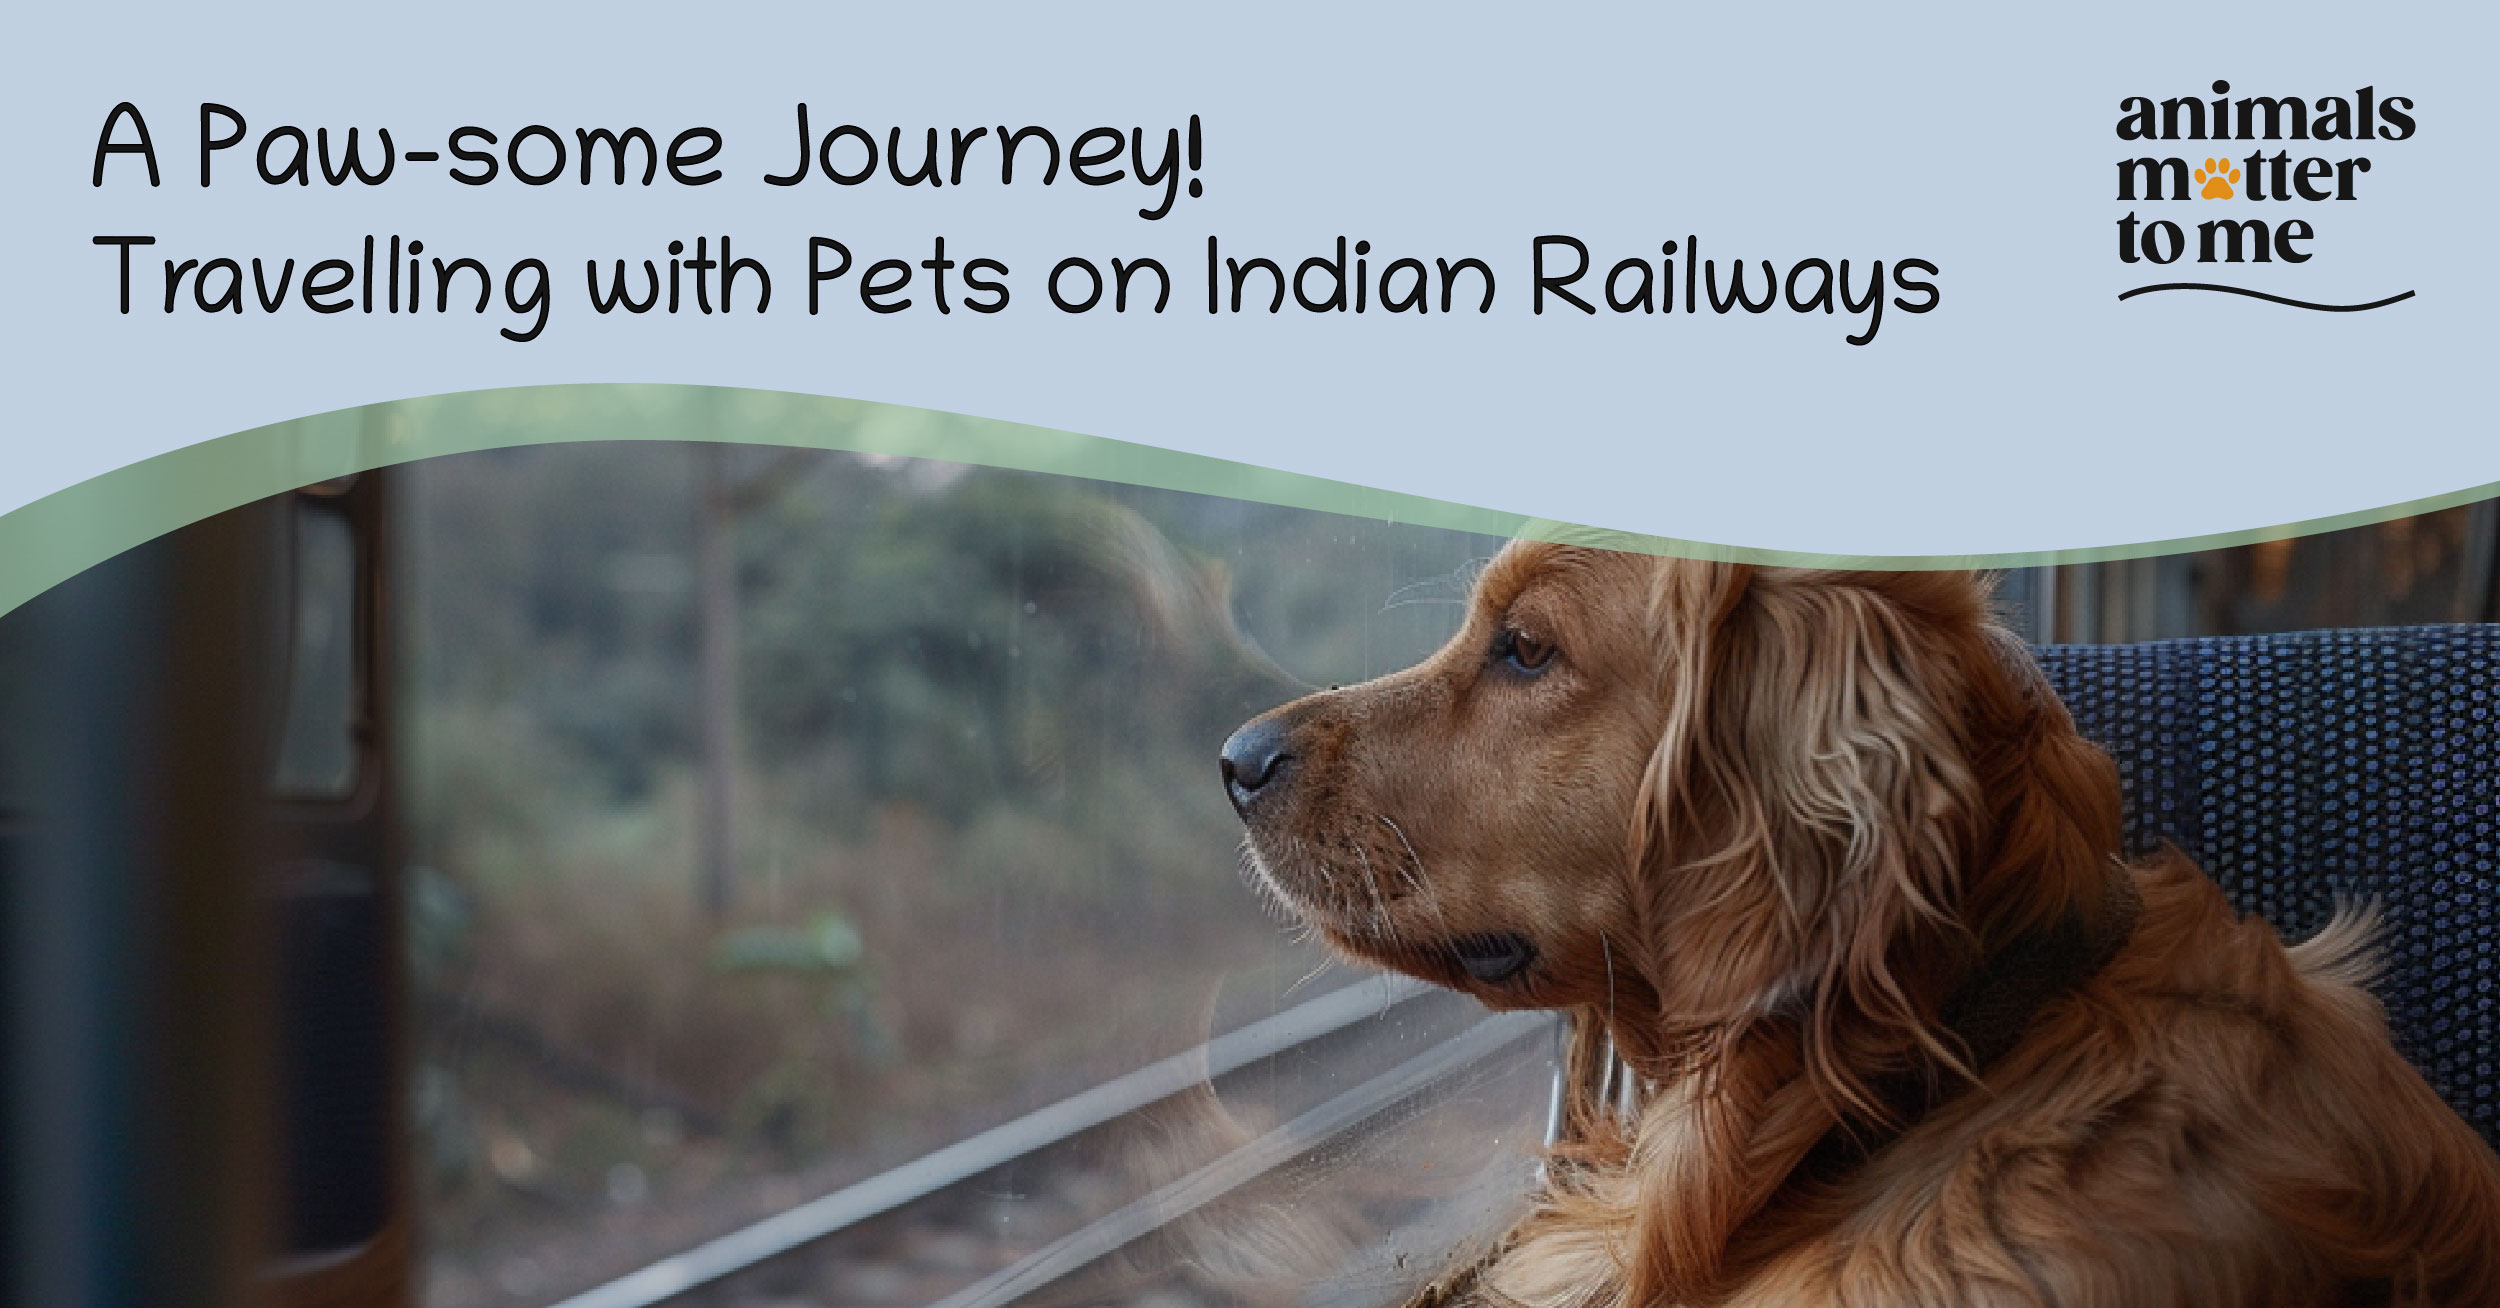 A Paw-some Journey! Travelling with Pets on Indian Railways